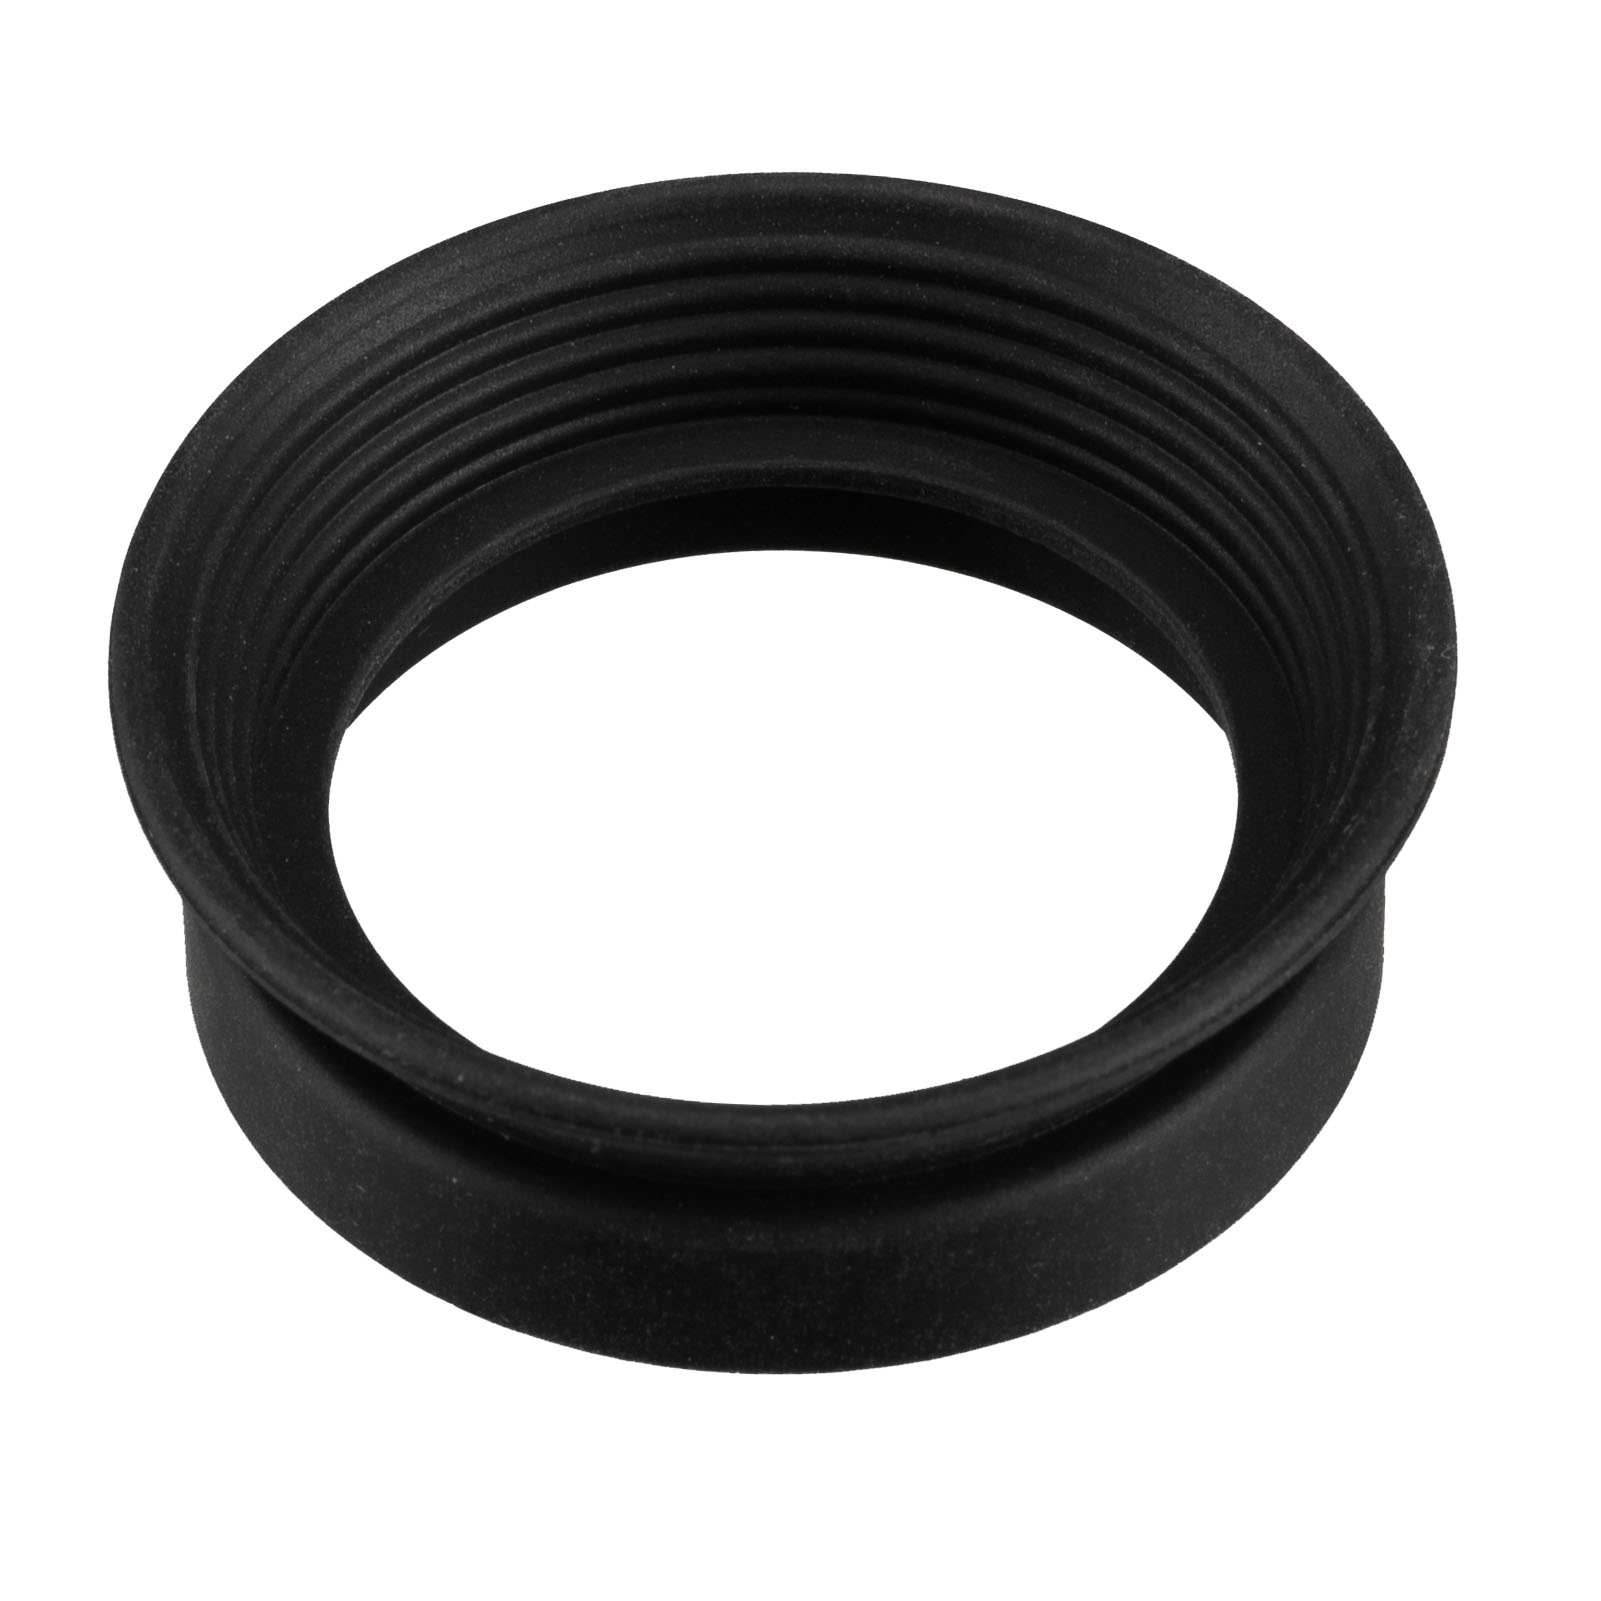 Silicone Eye Cup Diameter 43mm for ES Eyepieces